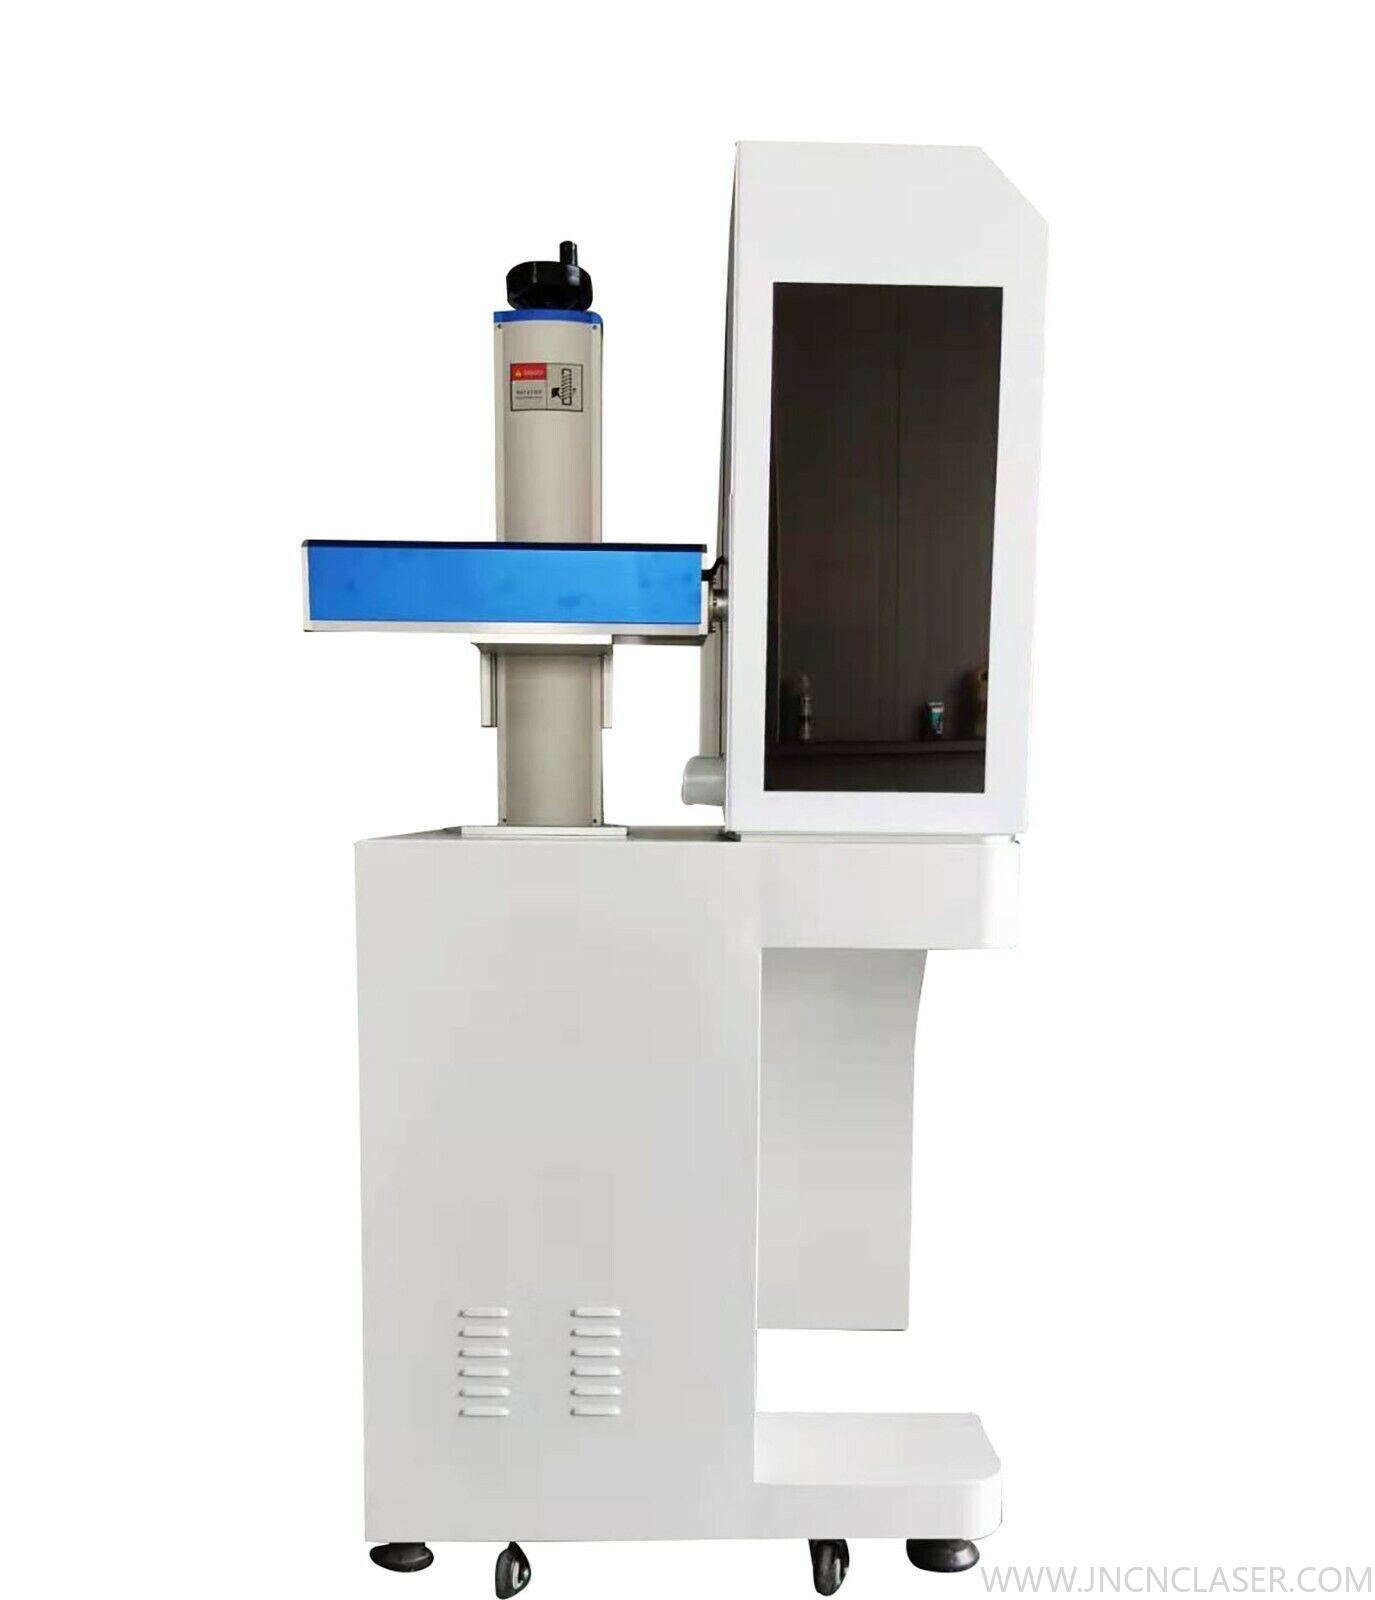 SMARTECH UV Laser Marking Machine with Cover